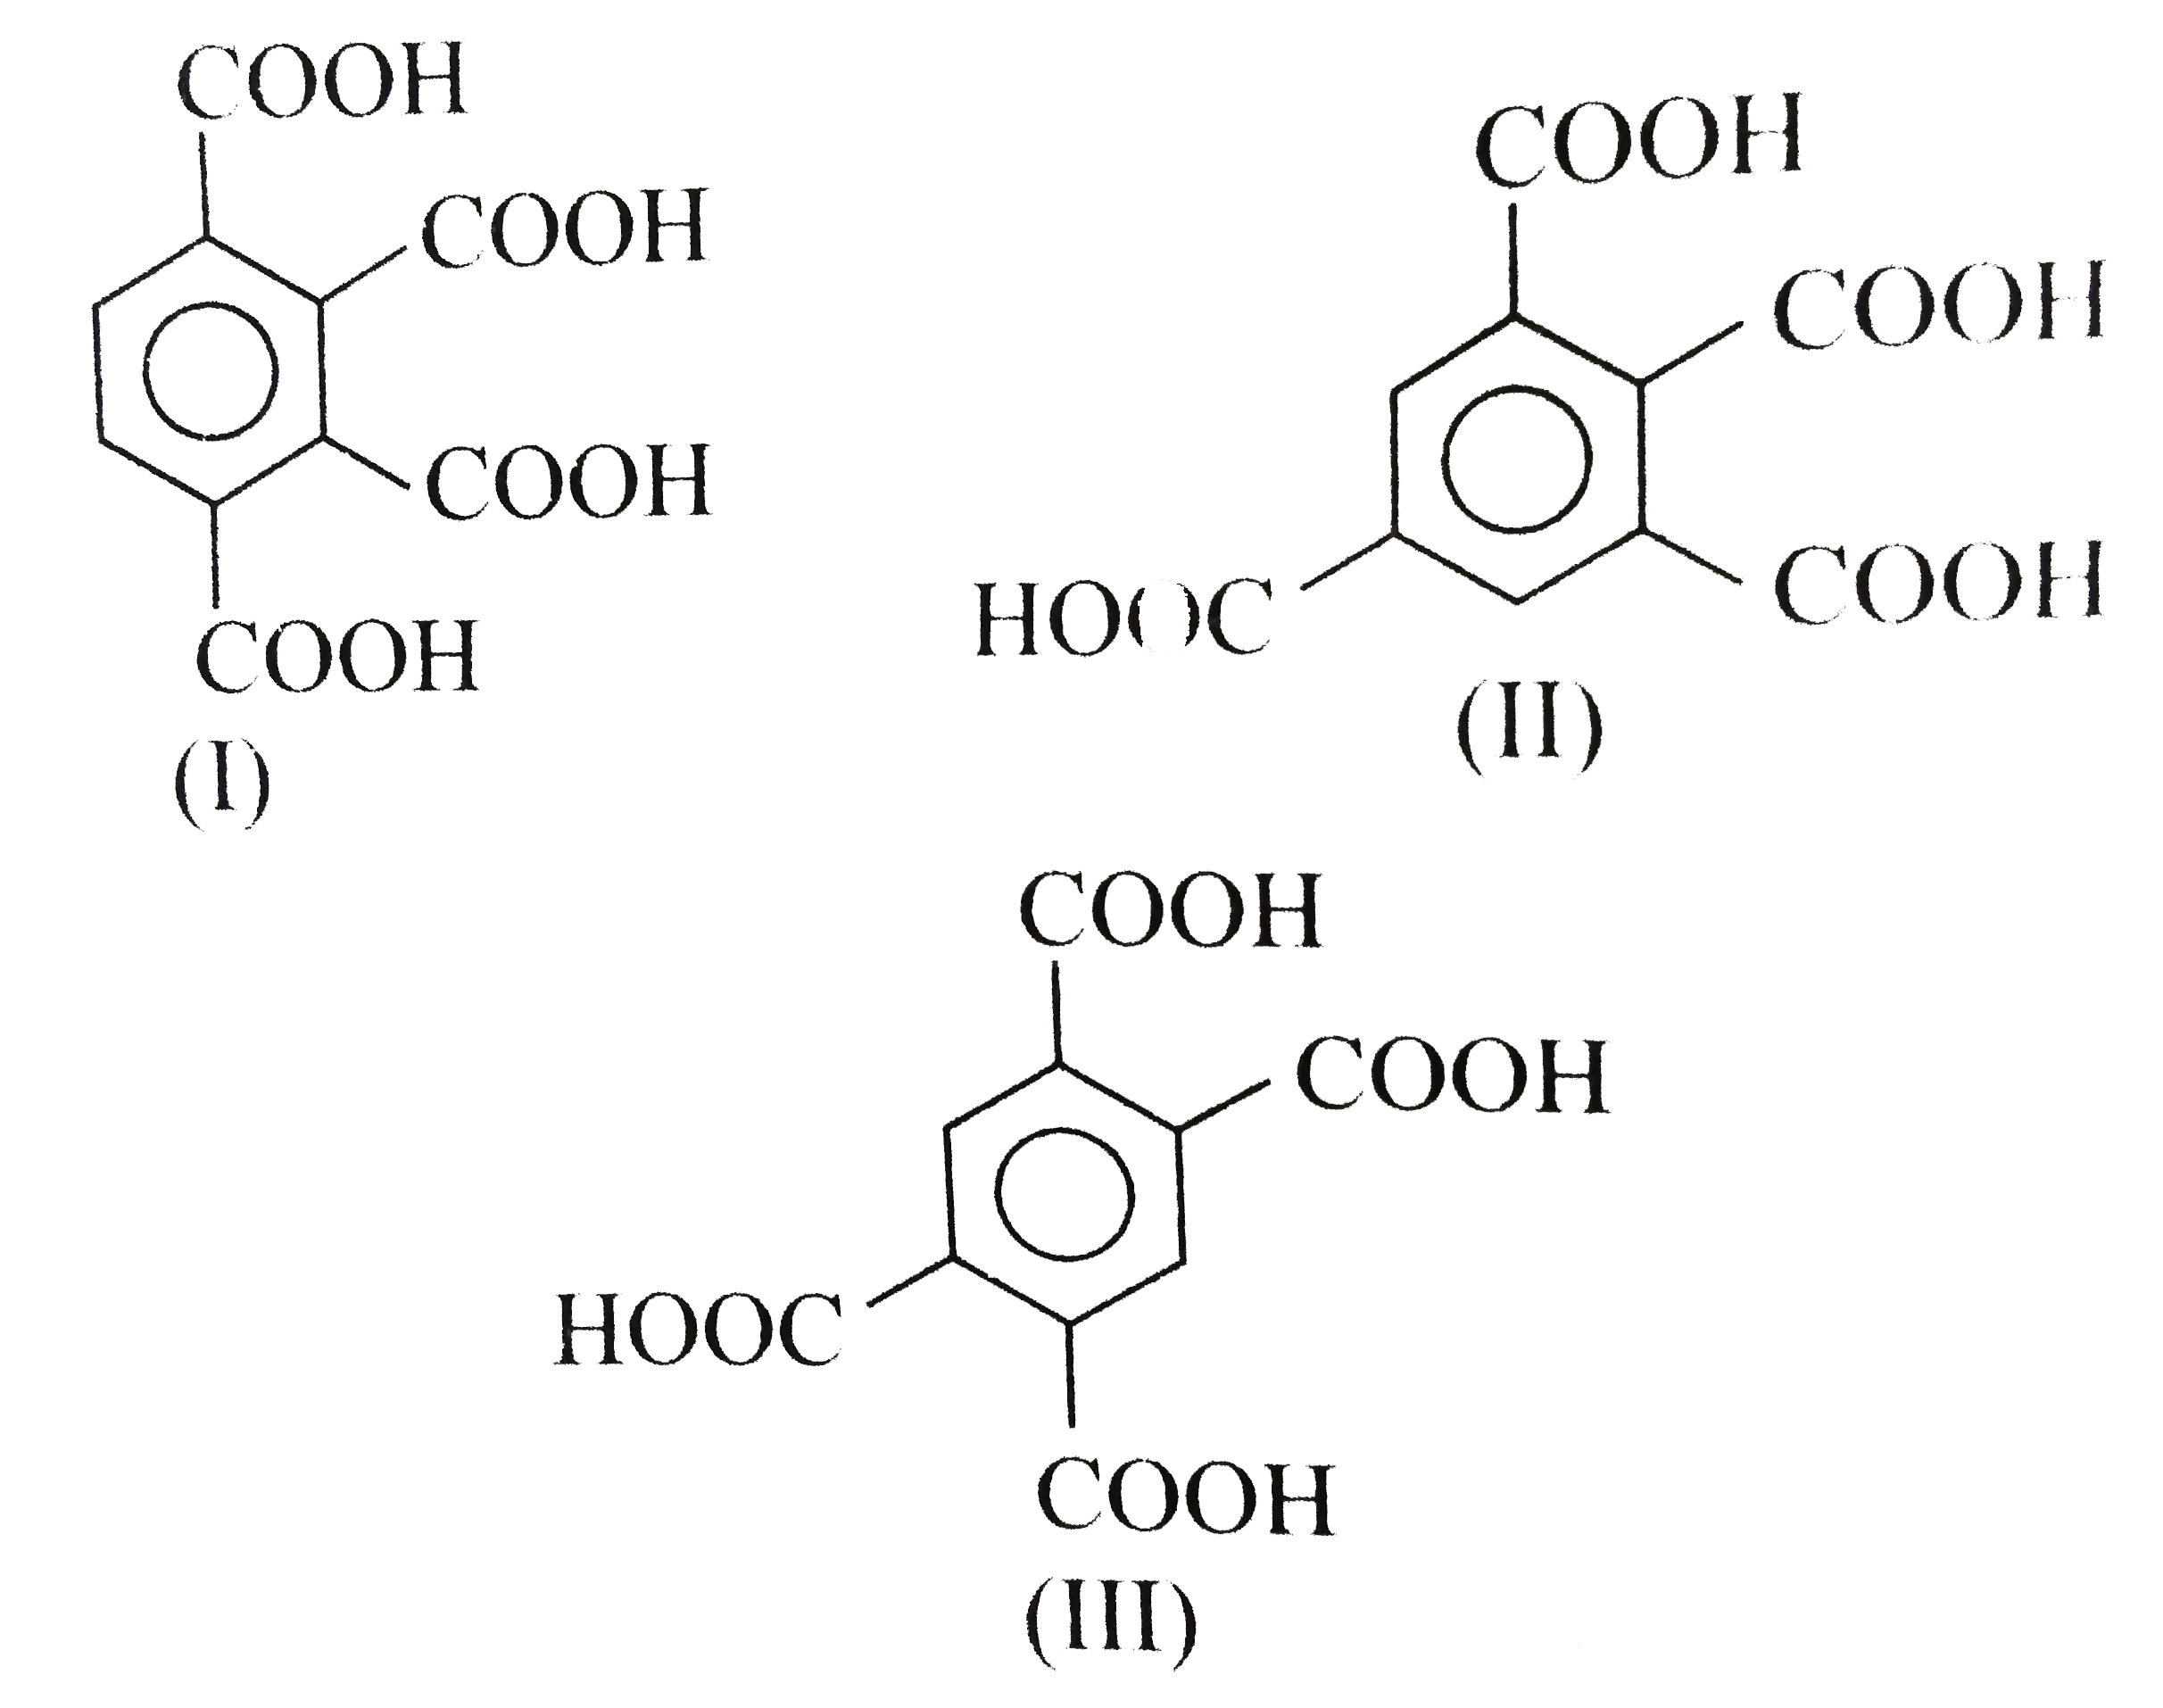 Three isomeric tetracarboxylic acids (I),(II), and (III) are given.      They can be distinguised by anhydride formation by treating with one equivalent and two equivalents of SOCl2.   Which tetracarboxylic acid on reaction with second equivalent of SOCl2 to the monoanhydride of (I), (II), and (III) gives a dianhydride ?